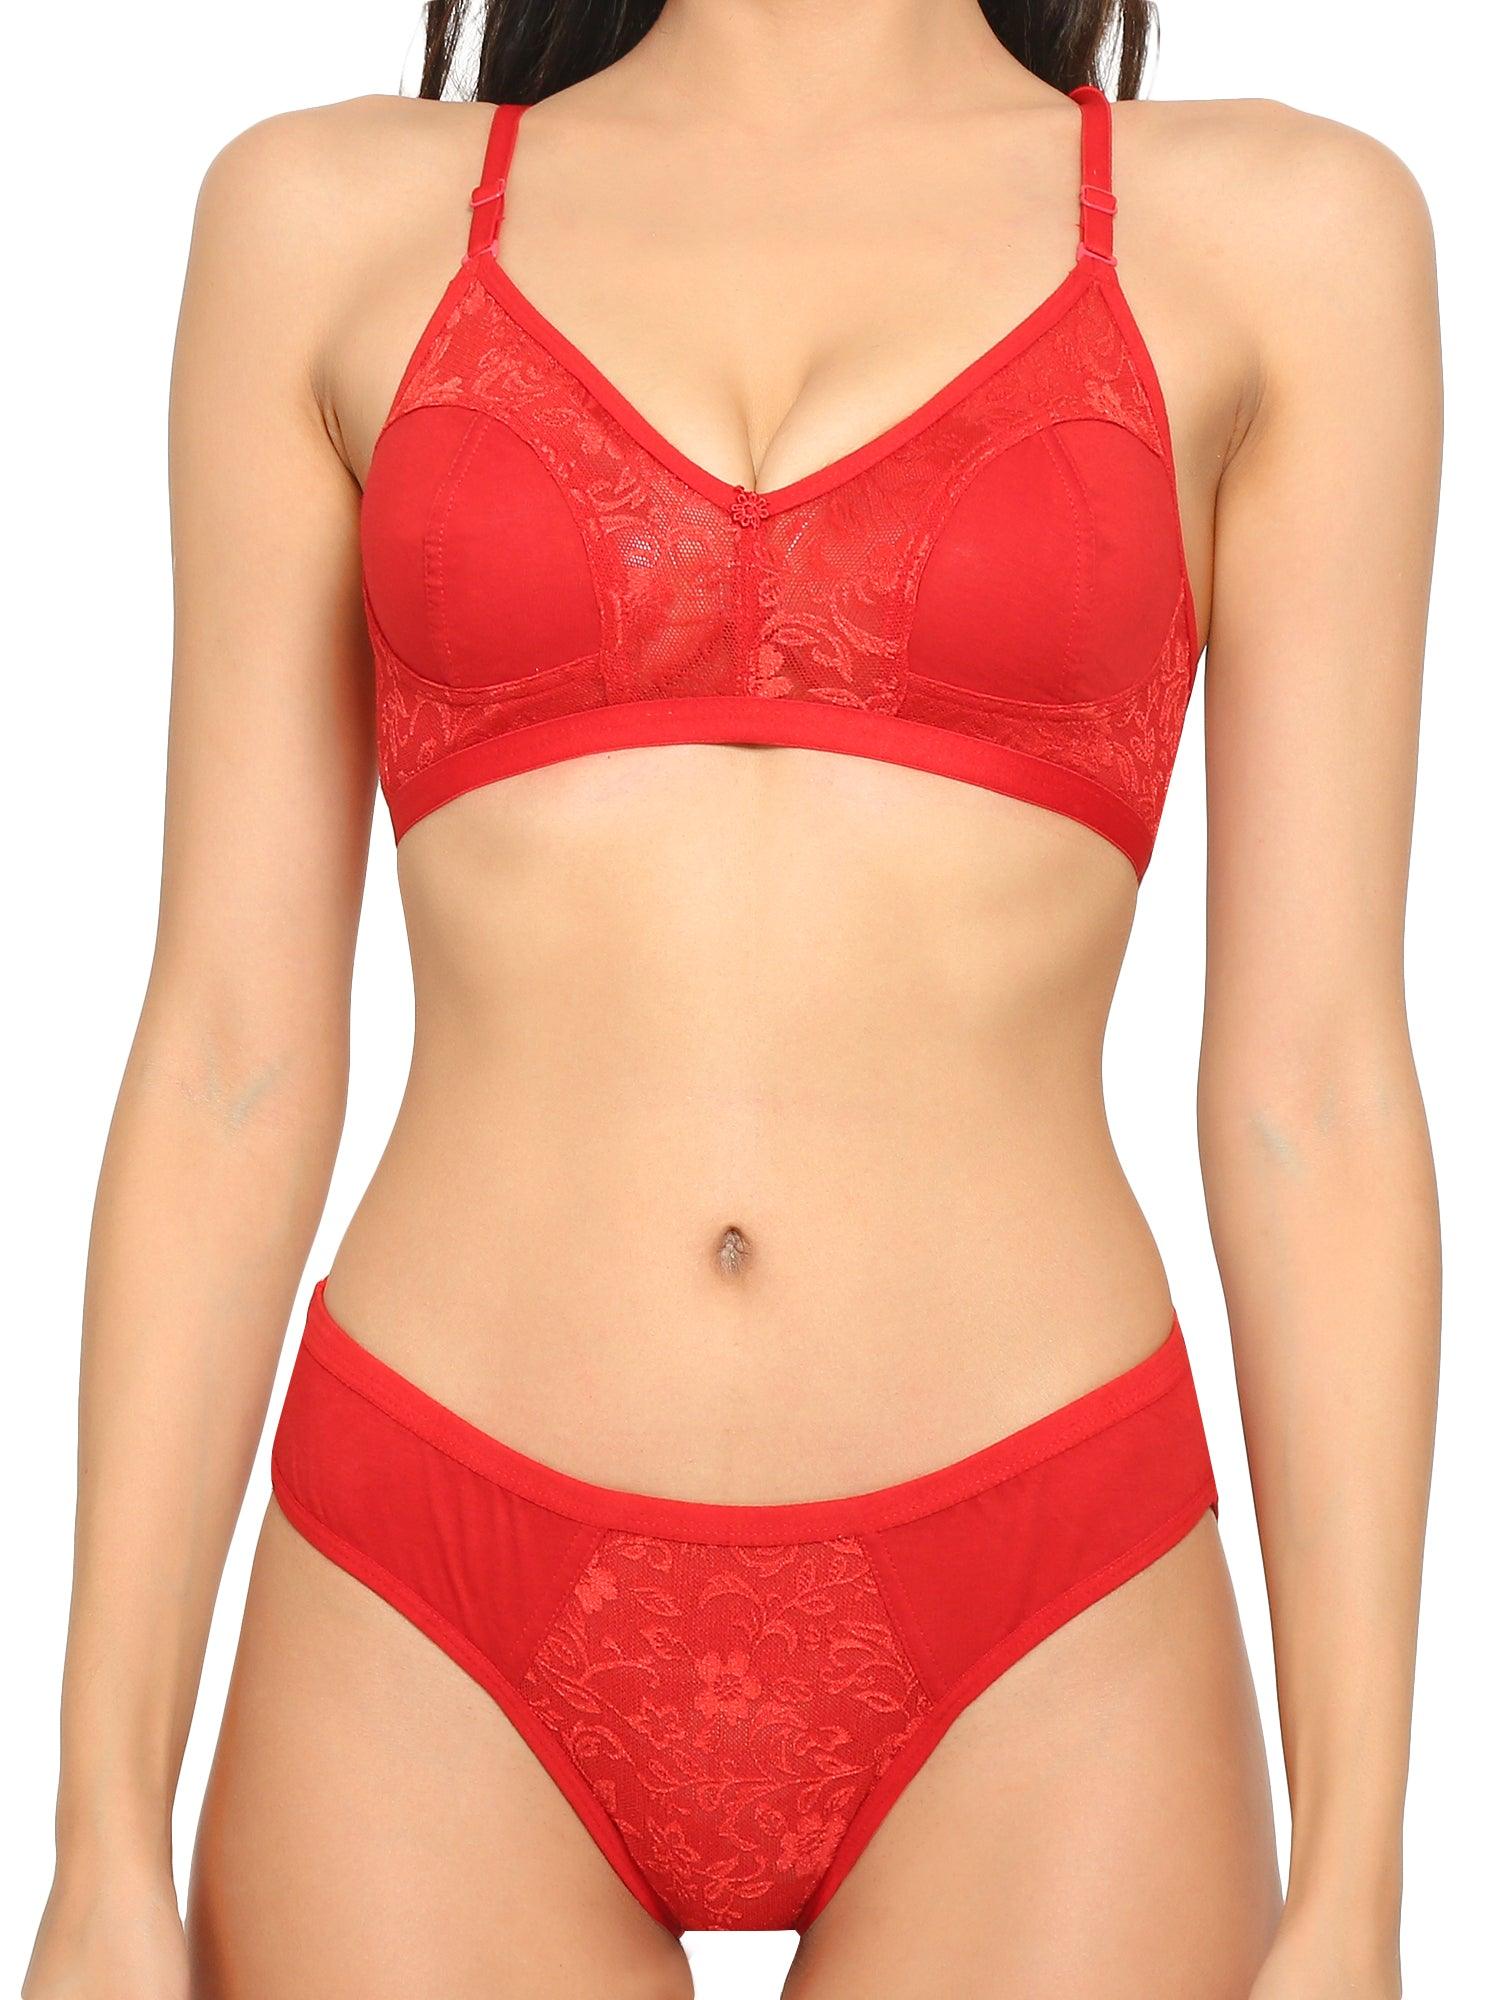 Women's Red Strappy Lace Bralette High Waist Lace Up Panty Set